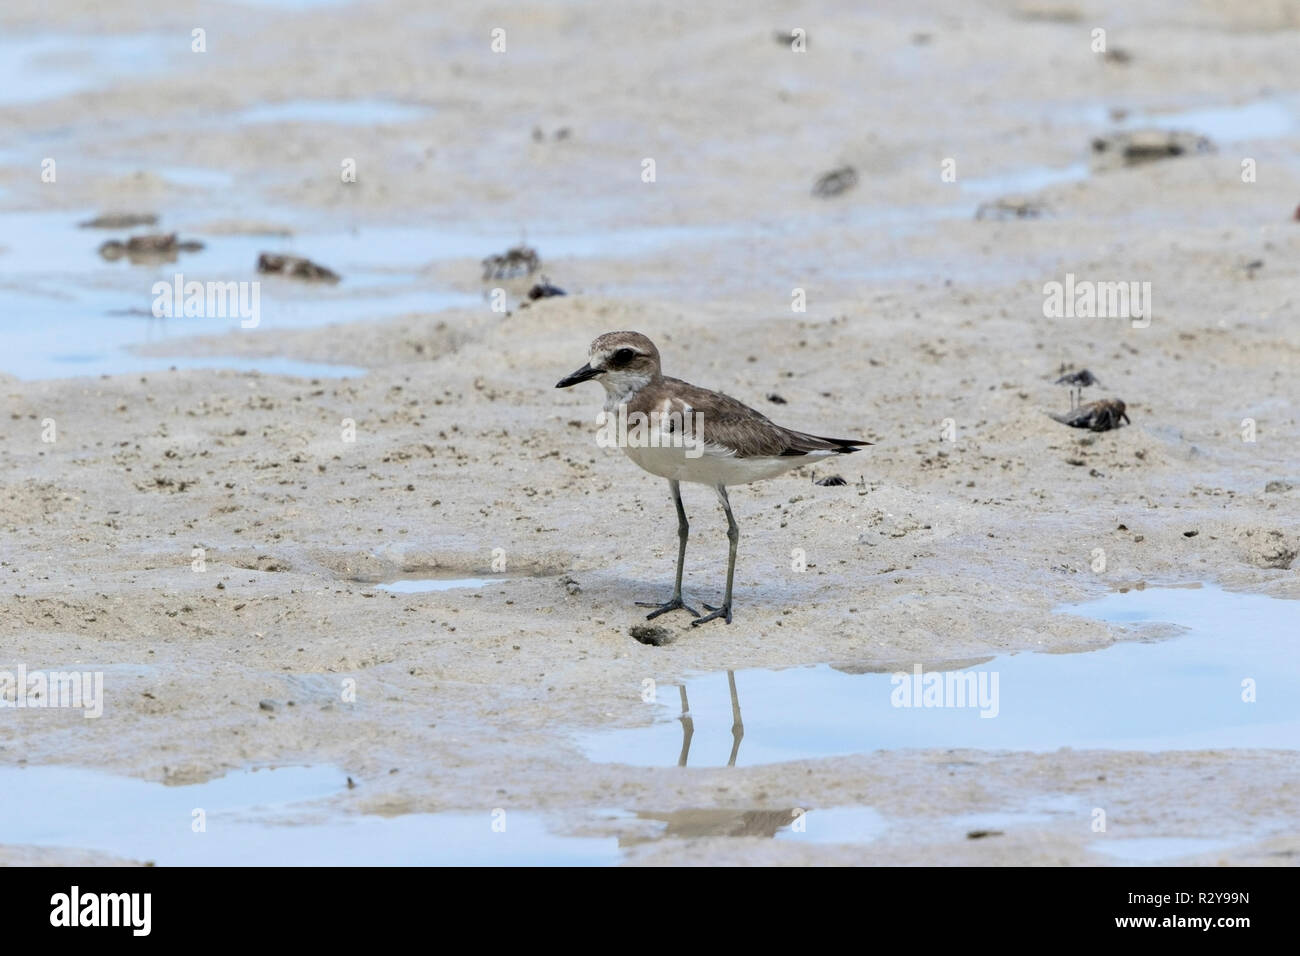 greater sand plover Charadrius leschenaultii standing on mud in estuary with crabs nearby, Mahe, Seychelles Stock Photo